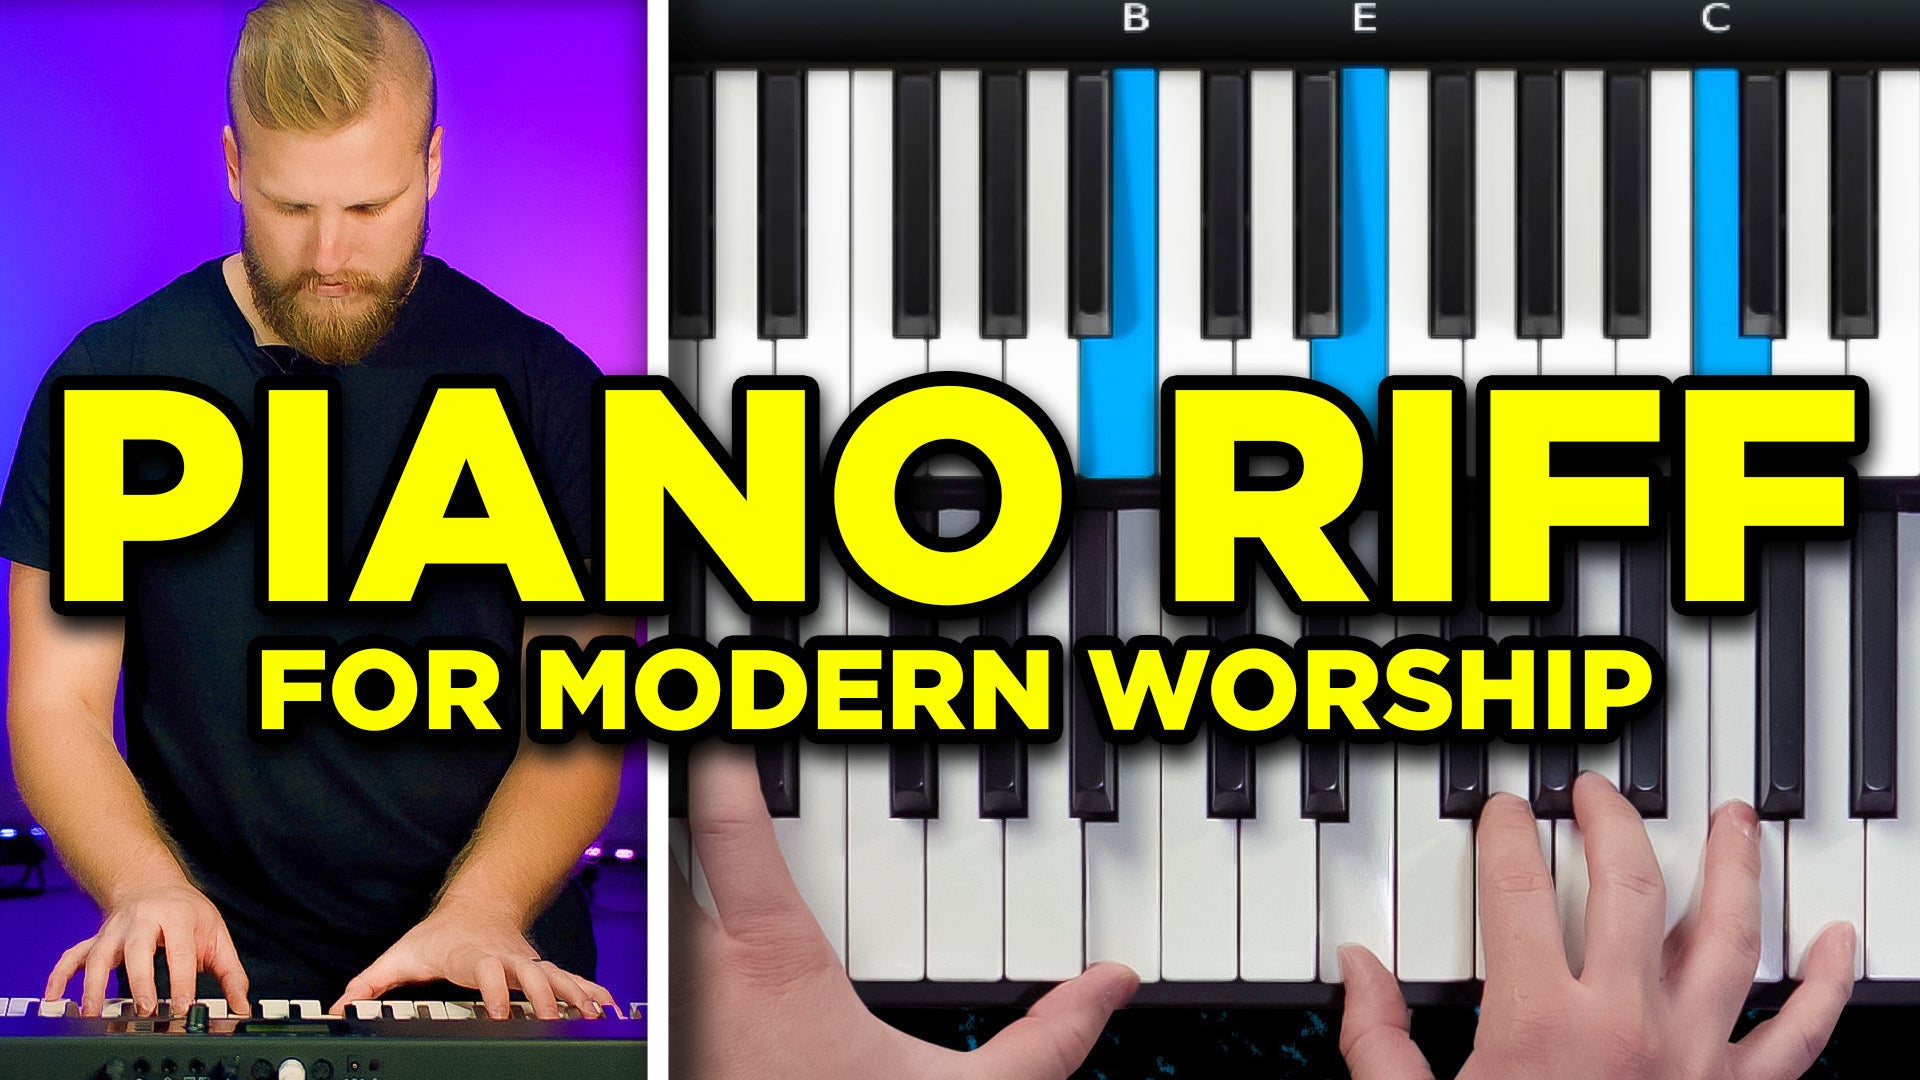 Learn this Simple Worship Piano Riff - Beginner Guide